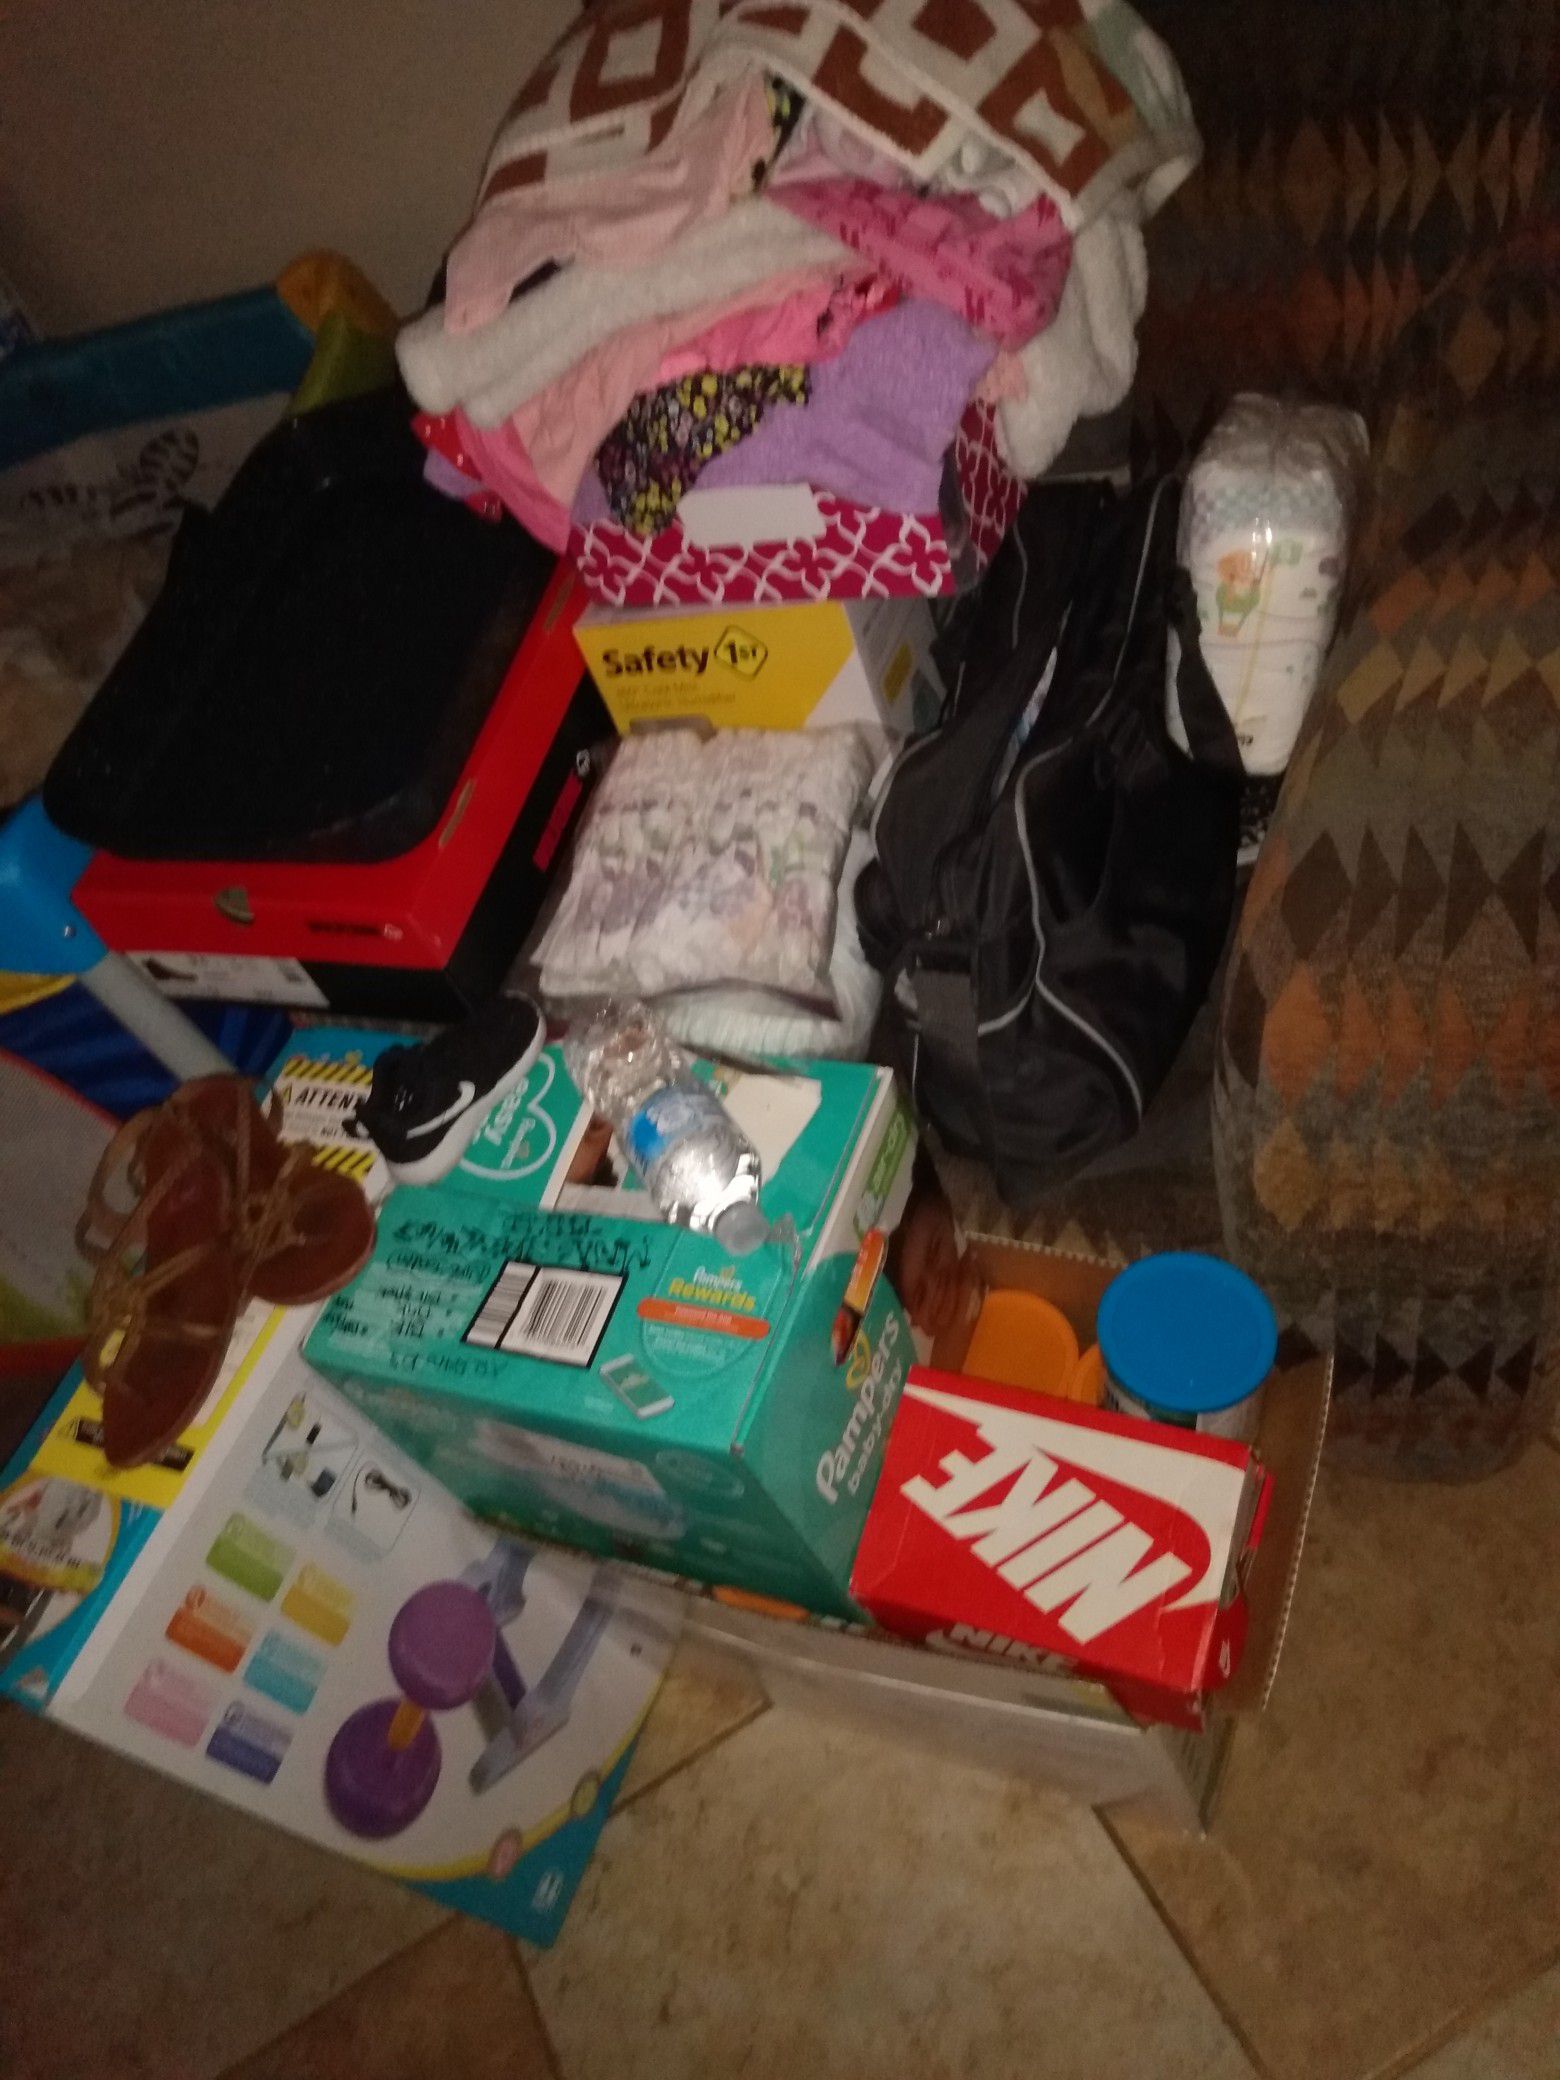 Baby Humidifier, Nikes,Jordans,Babygirl clothes 3-24 months, baby girl shoes ect. SO MANY ITEMS THAT ARE STILL NEW!!! & a few that are gently used